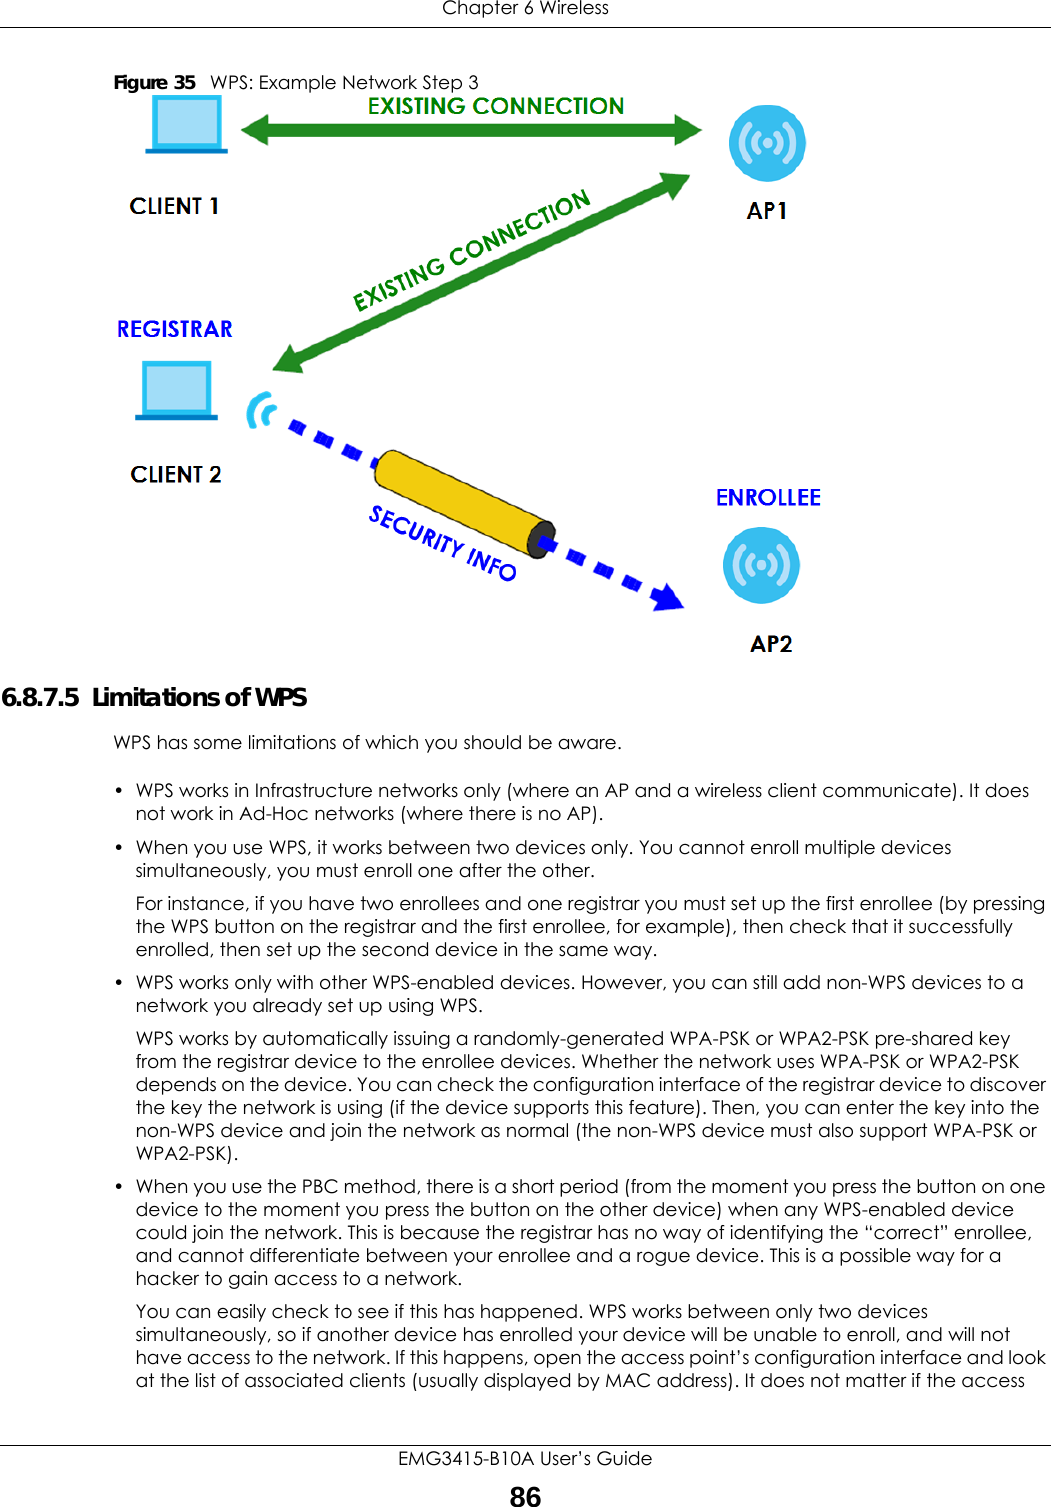 Chapter 6 WirelessEMG3415-B10A User’s Guide86Figure 35   WPS: Example Network Step 36.8.7.5  Limitations of WPSWPS has some limitations of which you should be aware. • WPS works in Infrastructure networks only (where an AP and a wireless client communicate). It does not work in Ad-Hoc networks (where there is no AP).• When you use WPS, it works between two devices only. You cannot enroll multiple devices simultaneously, you must enroll one after the other. For instance, if you have two enrollees and one registrar you must set up the first enrollee (by pressing the WPS button on the registrar and the first enrollee, for example), then check that it successfully enrolled, then set up the second device in the same way.• WPS works only with other WPS-enabled devices. However, you can still add non-WPS devices to a network you already set up using WPS. WPS works by automatically issuing a randomly-generated WPA-PSK or WPA2-PSK pre-shared key from the registrar device to the enrollee devices. Whether the network uses WPA-PSK or WPA2-PSK depends on the device. You can check the configuration interface of the registrar device to discover the key the network is using (if the device supports this feature). Then, you can enter the key into the non-WPS device and join the network as normal (the non-WPS device must also support WPA-PSK or WPA2-PSK).• When you use the PBC method, there is a short period (from the moment you press the button on one device to the moment you press the button on the other device) when any WPS-enabled device could join the network. This is because the registrar has no way of identifying the “correct” enrollee, and cannot differentiate between your enrollee and a rogue device. This is a possible way for a hacker to gain access to a network.You can easily check to see if this has happened. WPS works between only two devices simultaneously, so if another device has enrolled your device will be unable to enroll, and will not have access to the network. If this happens, open the access point’s configuration interface and look at the list of associated clients (usually displayed by MAC address). It does not matter if the access 